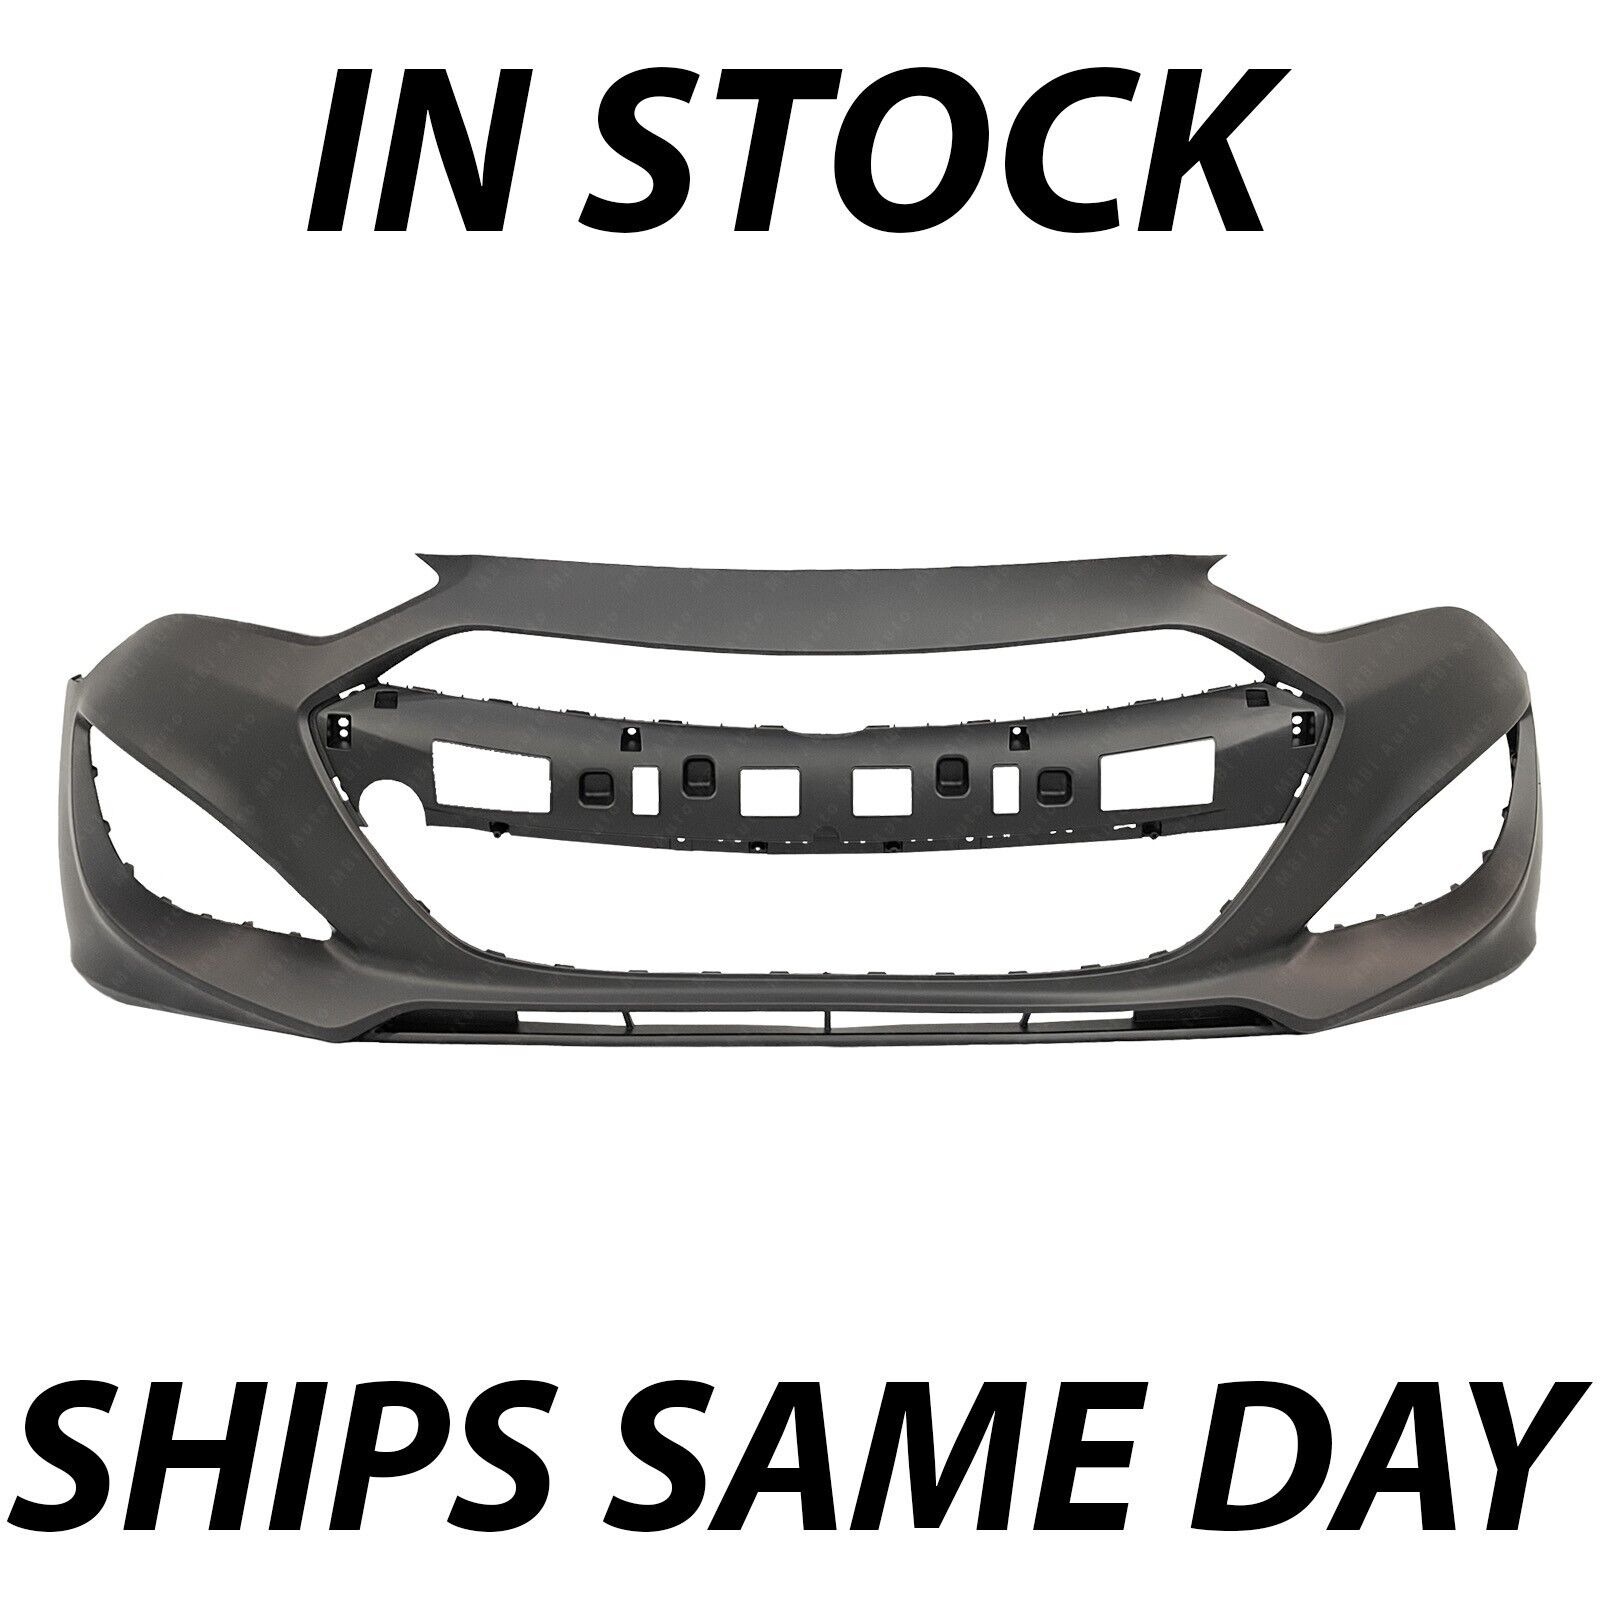 NEW Primered - Front Bumper Cover for 2013 2014 2015 Hyundai Genesis Coupe 13-16